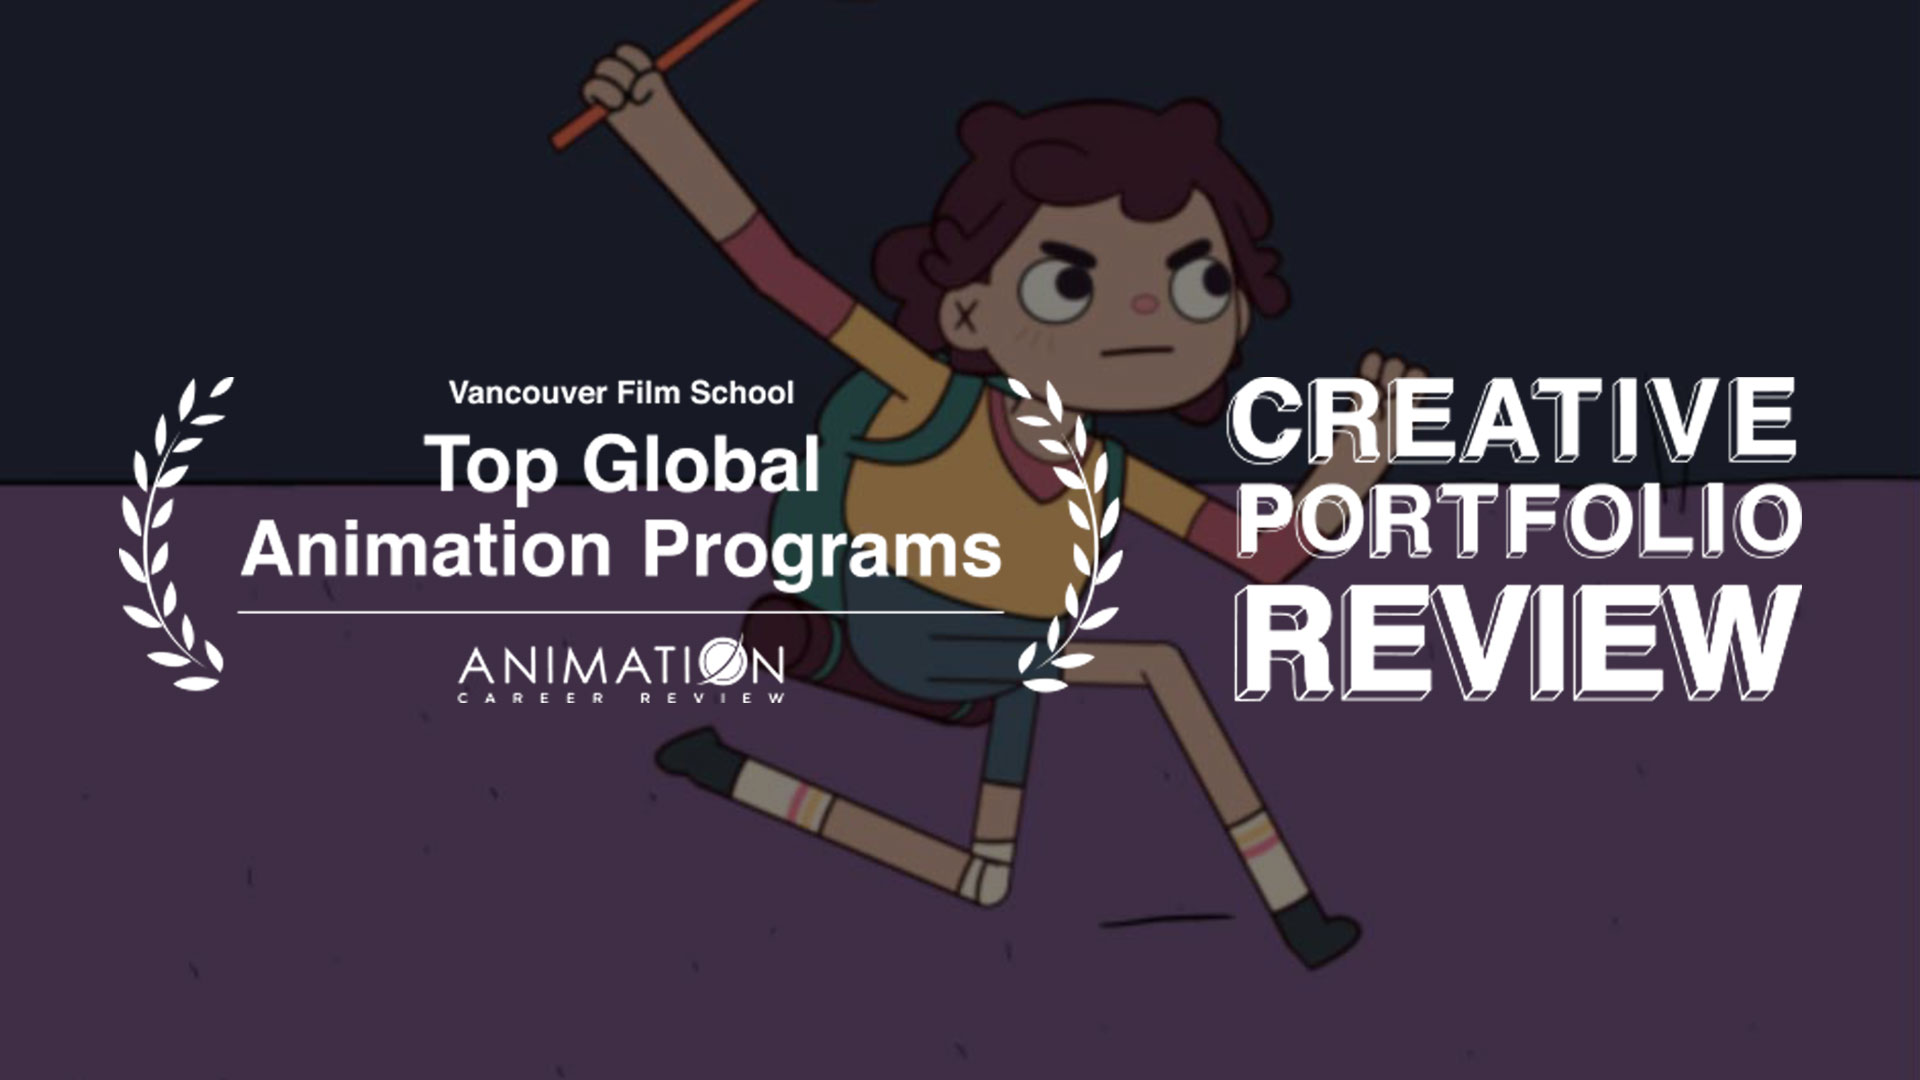 Classical Animation | Vancouver Film School